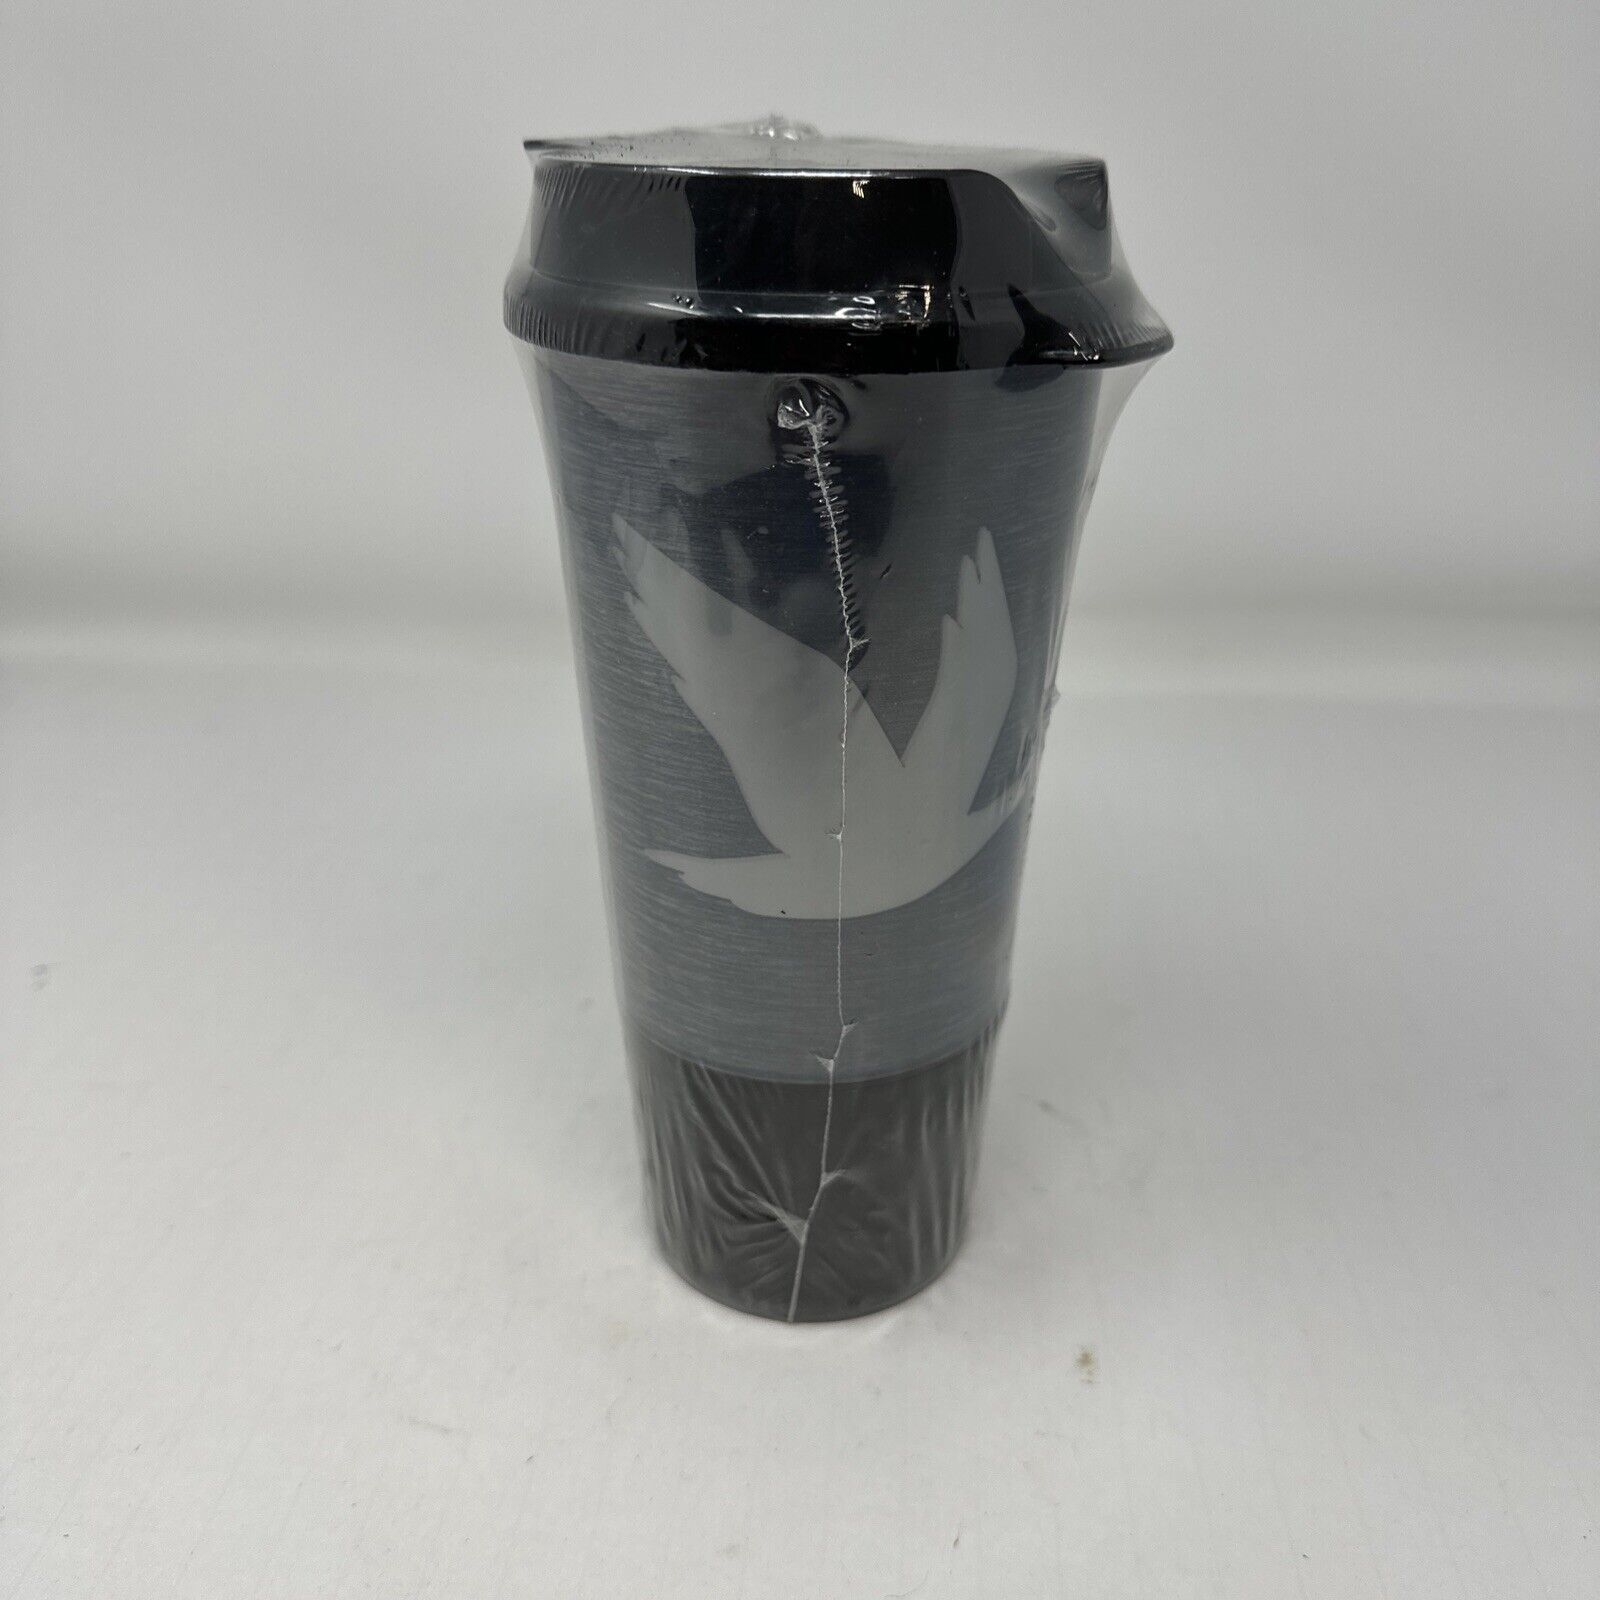 WAWA Official Travel Tumbler With Lid 20 oz Coffee Cup Gray Black Insulated Mug